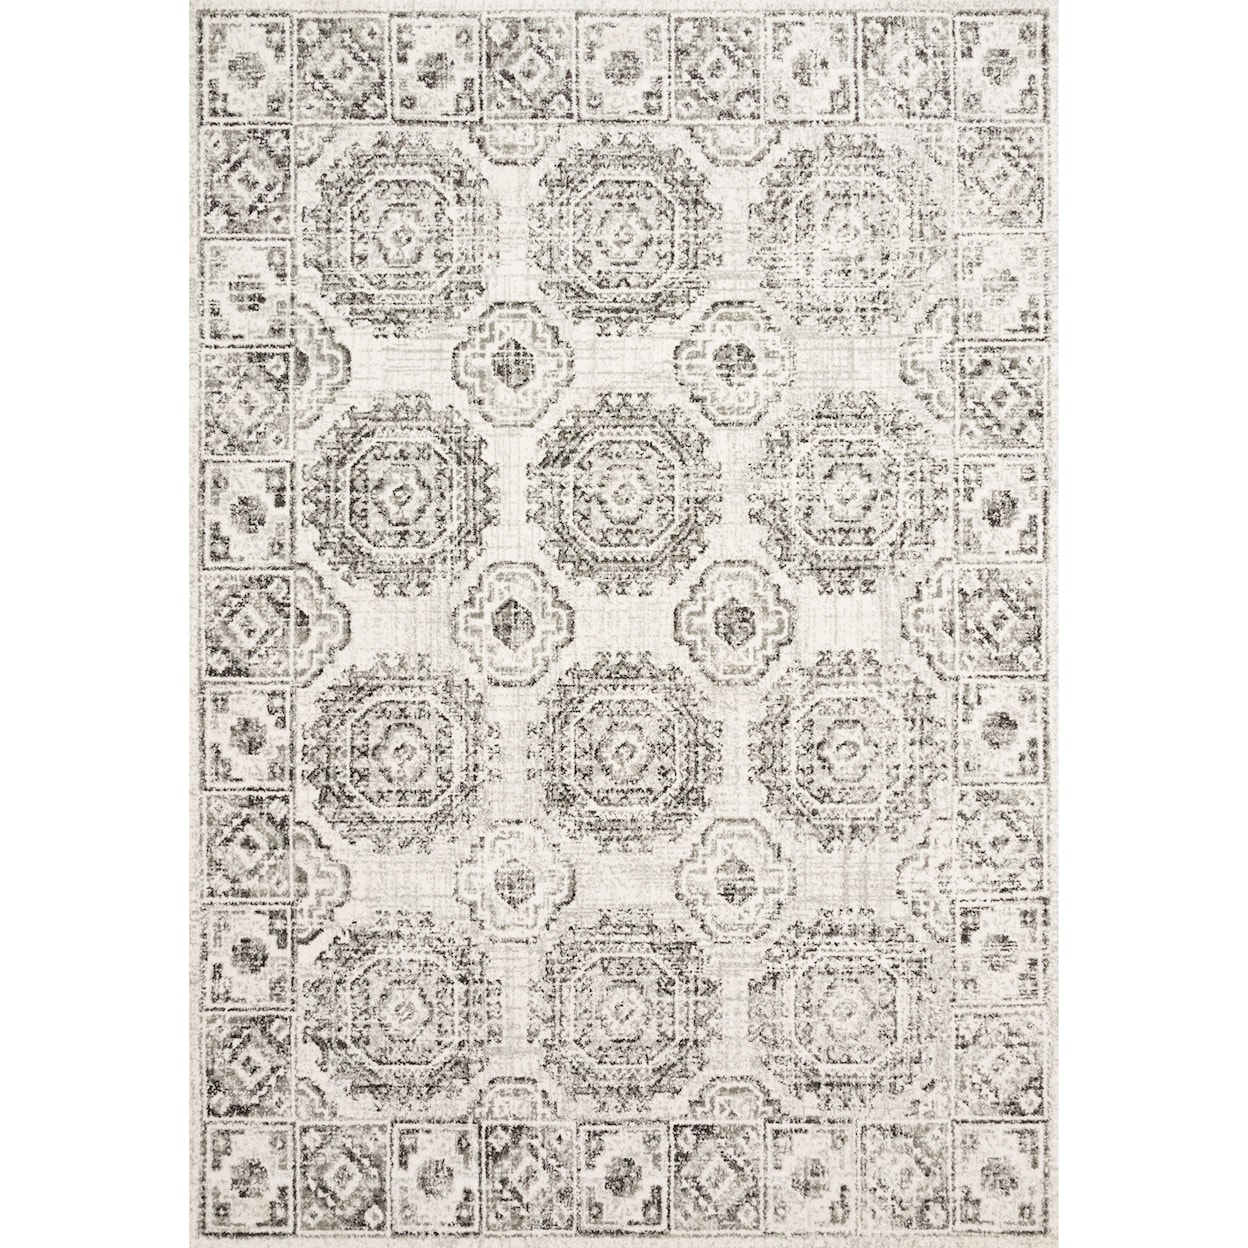 Loloi Rugs Joaquin 5'3" x 5'3" Round Ivory / Charcoal Rug